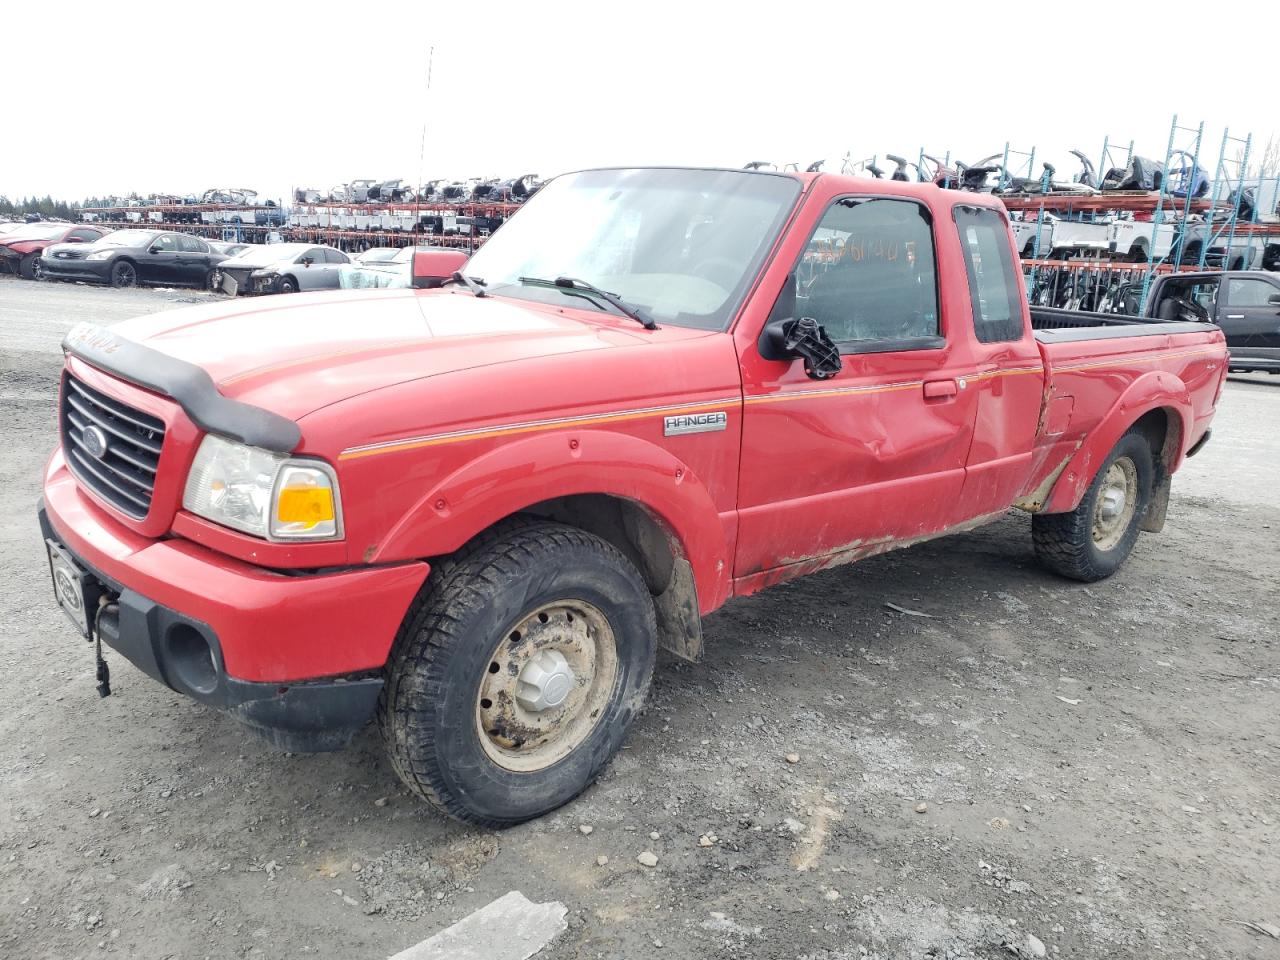 vin: 1FTZR45E09PA07754 1FTZR45E09PA07754 2009 ford ranger 4000 for Sale in h1b 4w3, Qc - Montreal, Montreal-Est, Canada